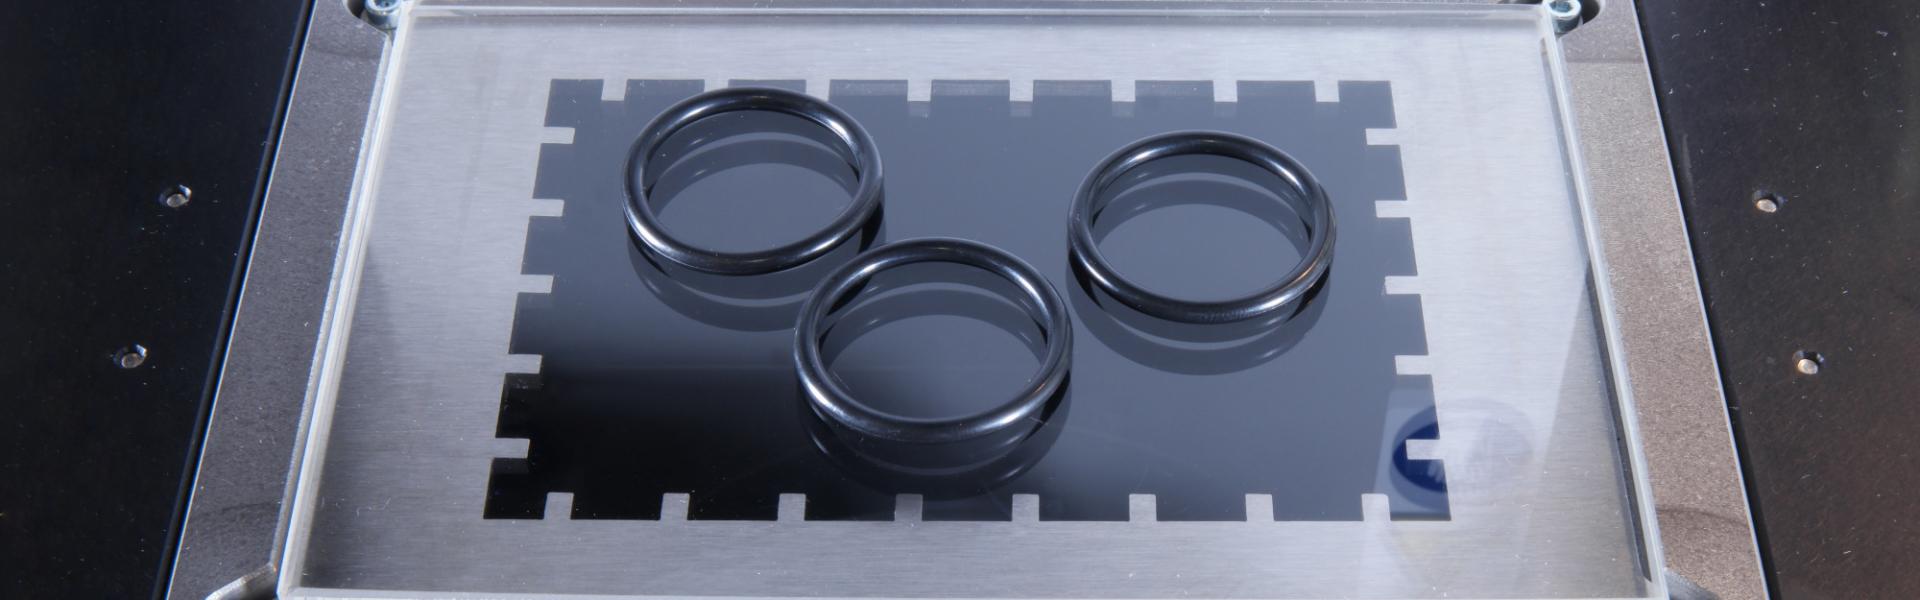 Do you manufacture rubber gaskets?